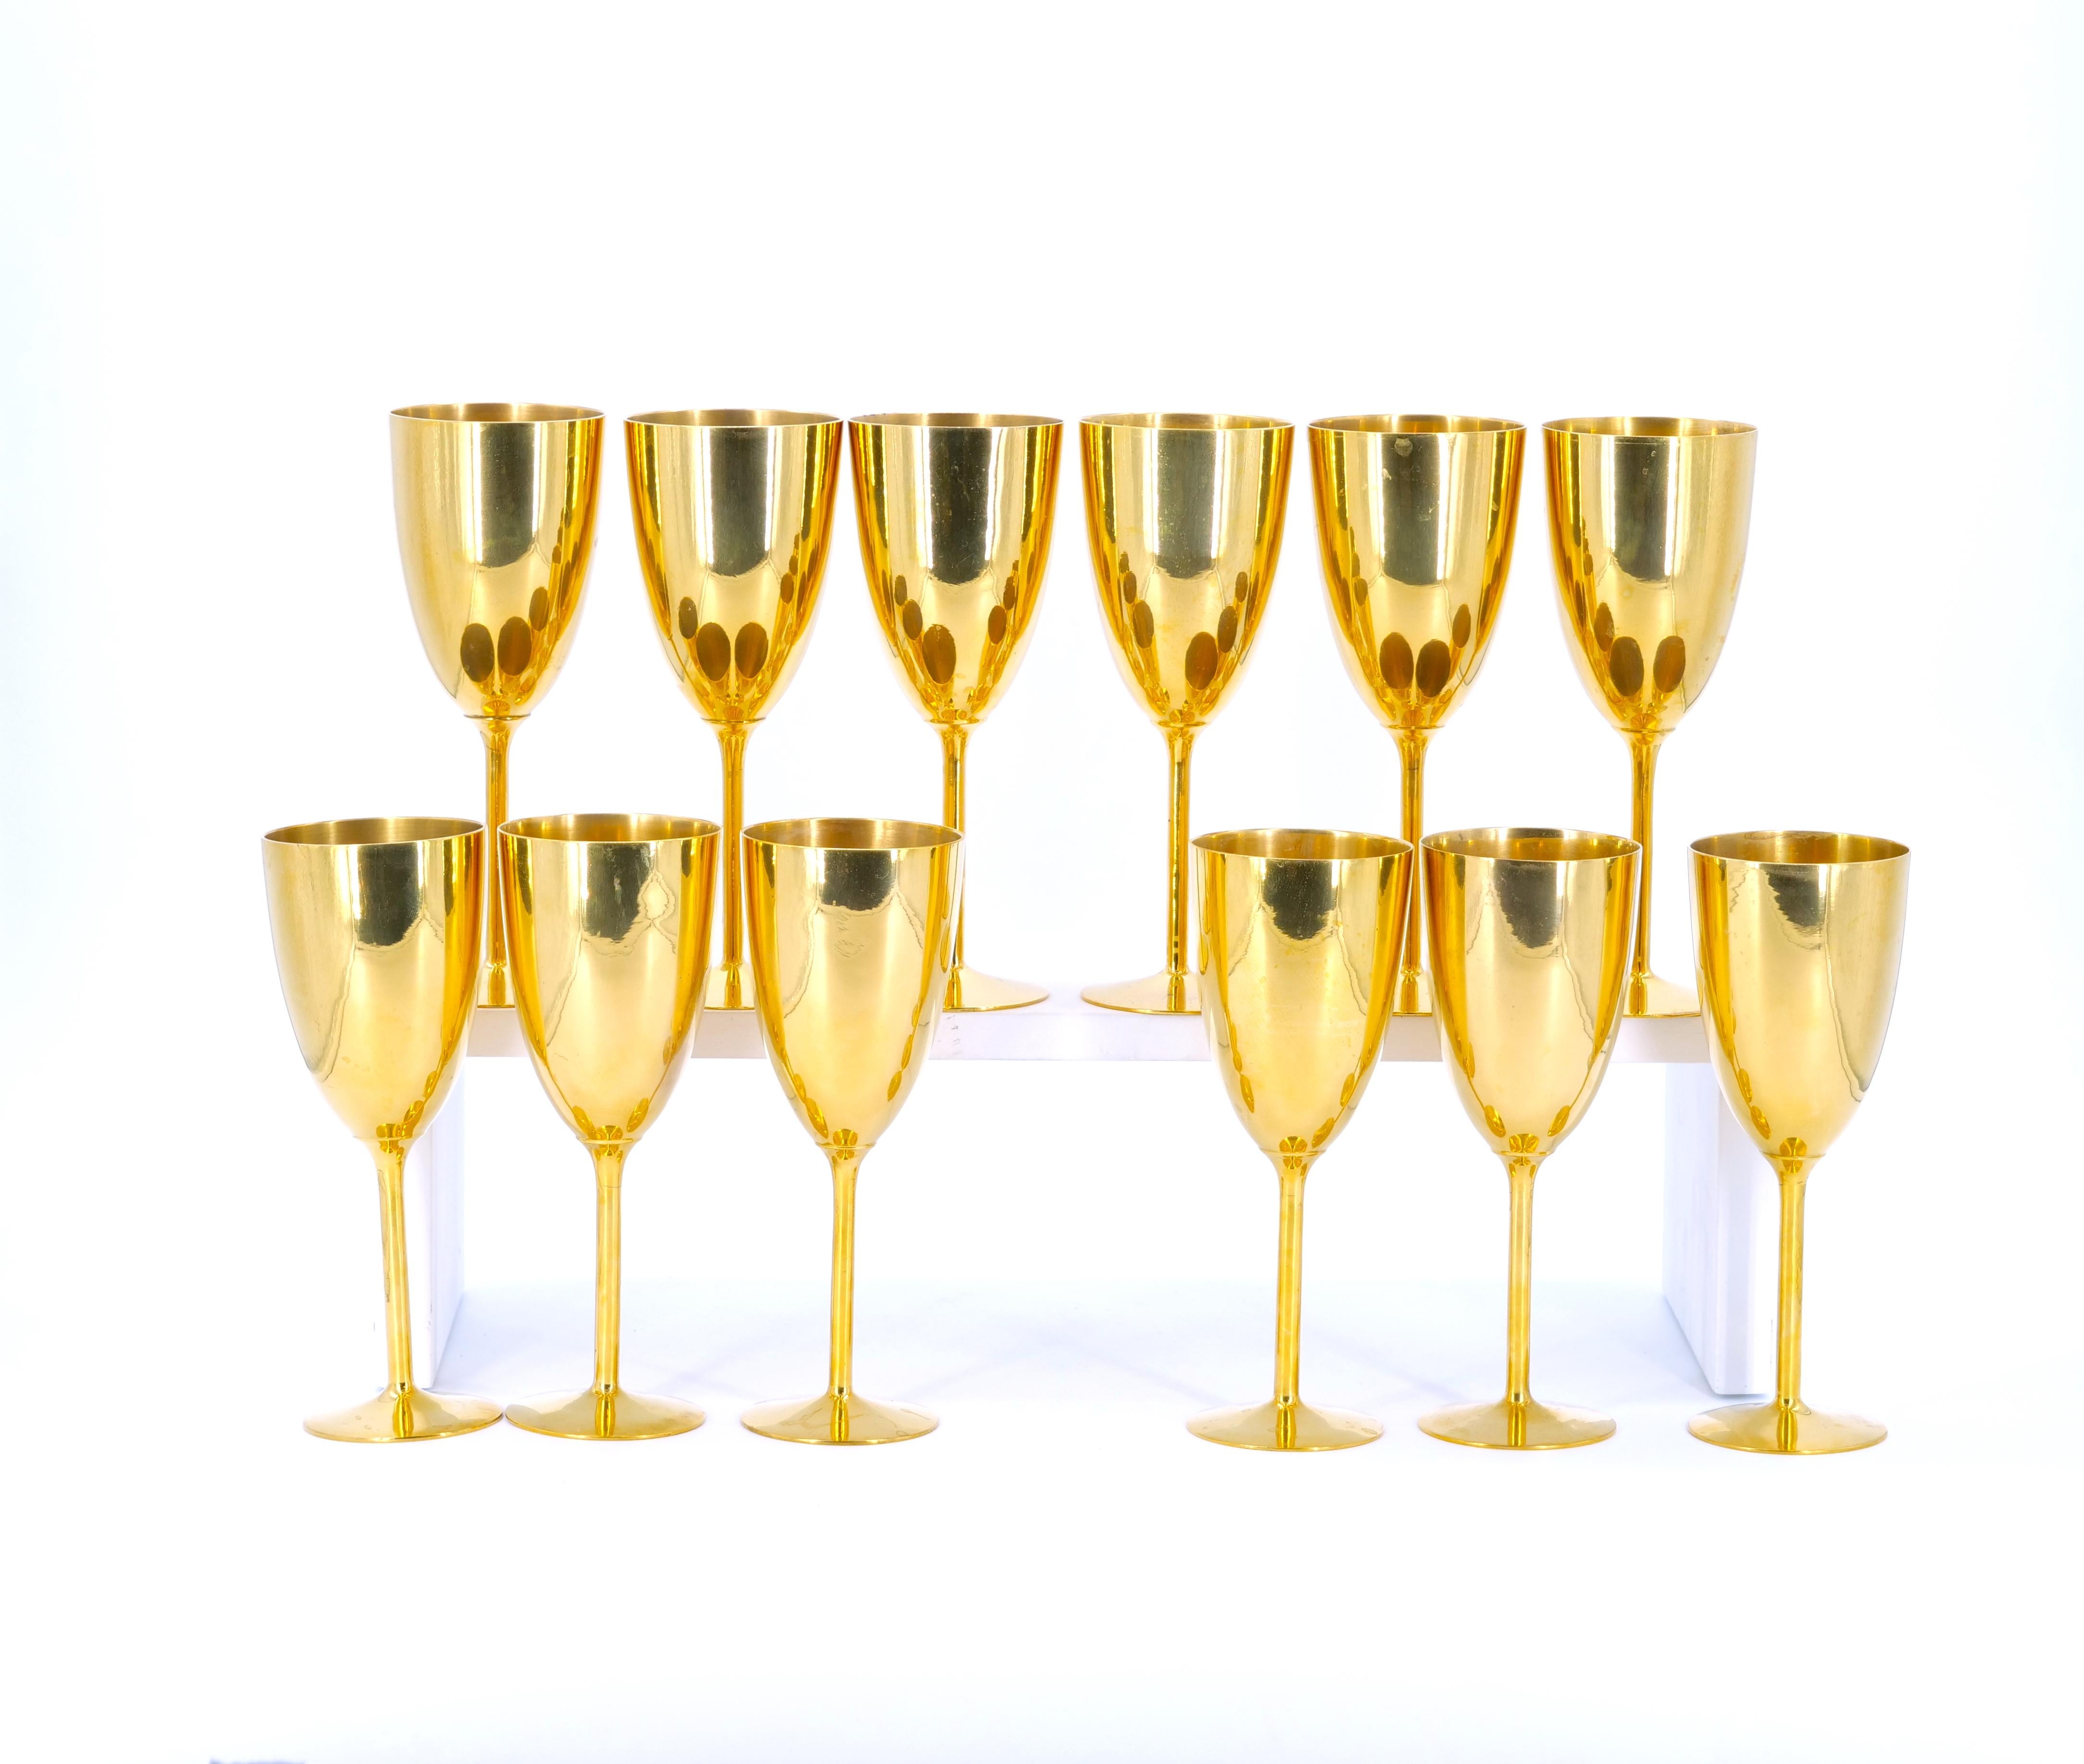 


Indulge in the opulence of our exquisite English barware and tableware collection with this stunning set of silver-plated and gilded wine / water goblets, designed to elevate your dining experience to new heights. Meticulously crafted to the